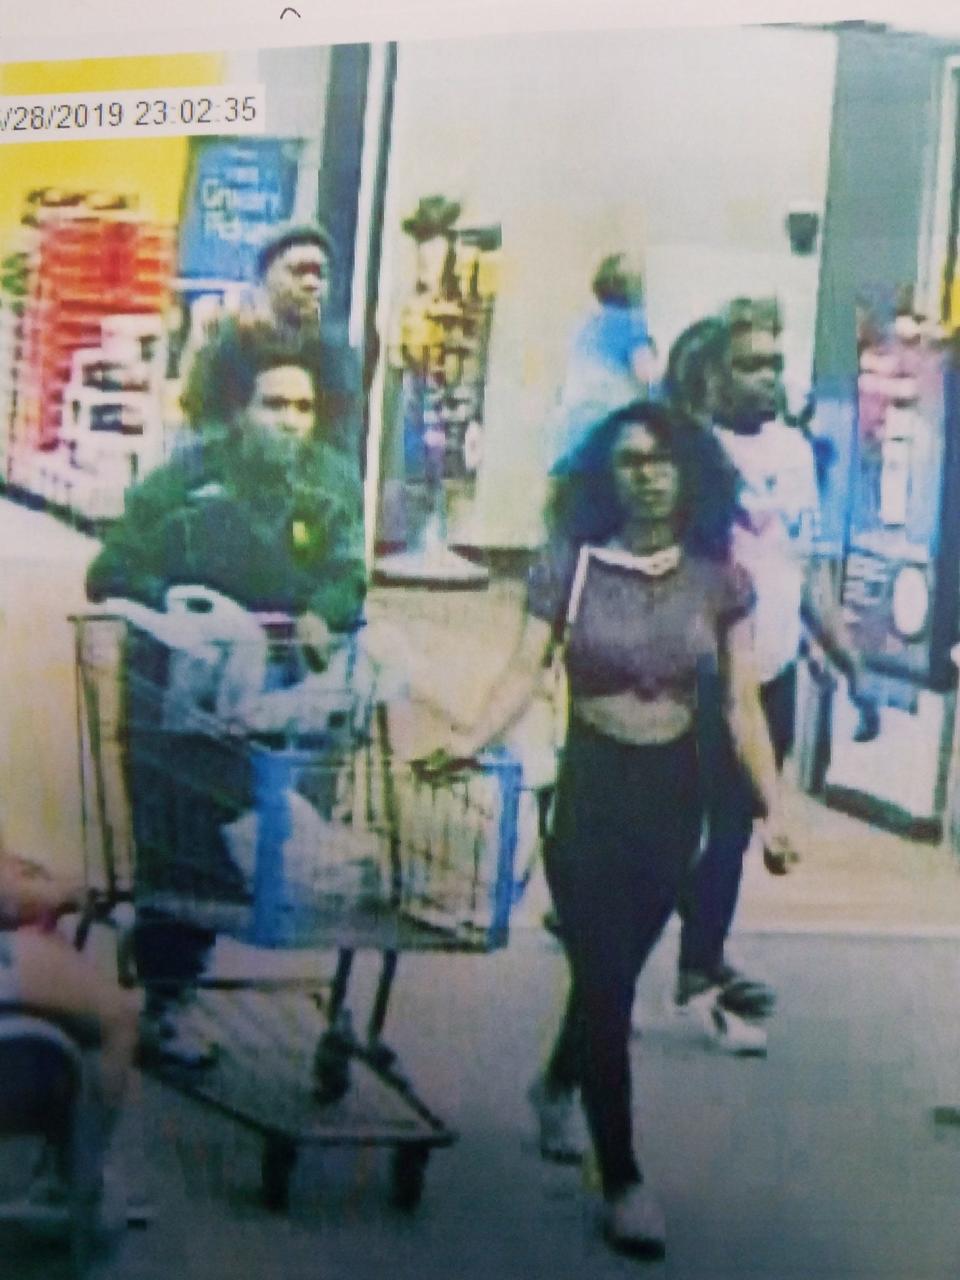 Police believe this woman is responsible for licking a half-gallon tub of Blue Bell ice cream and then putting it back on store shelves.